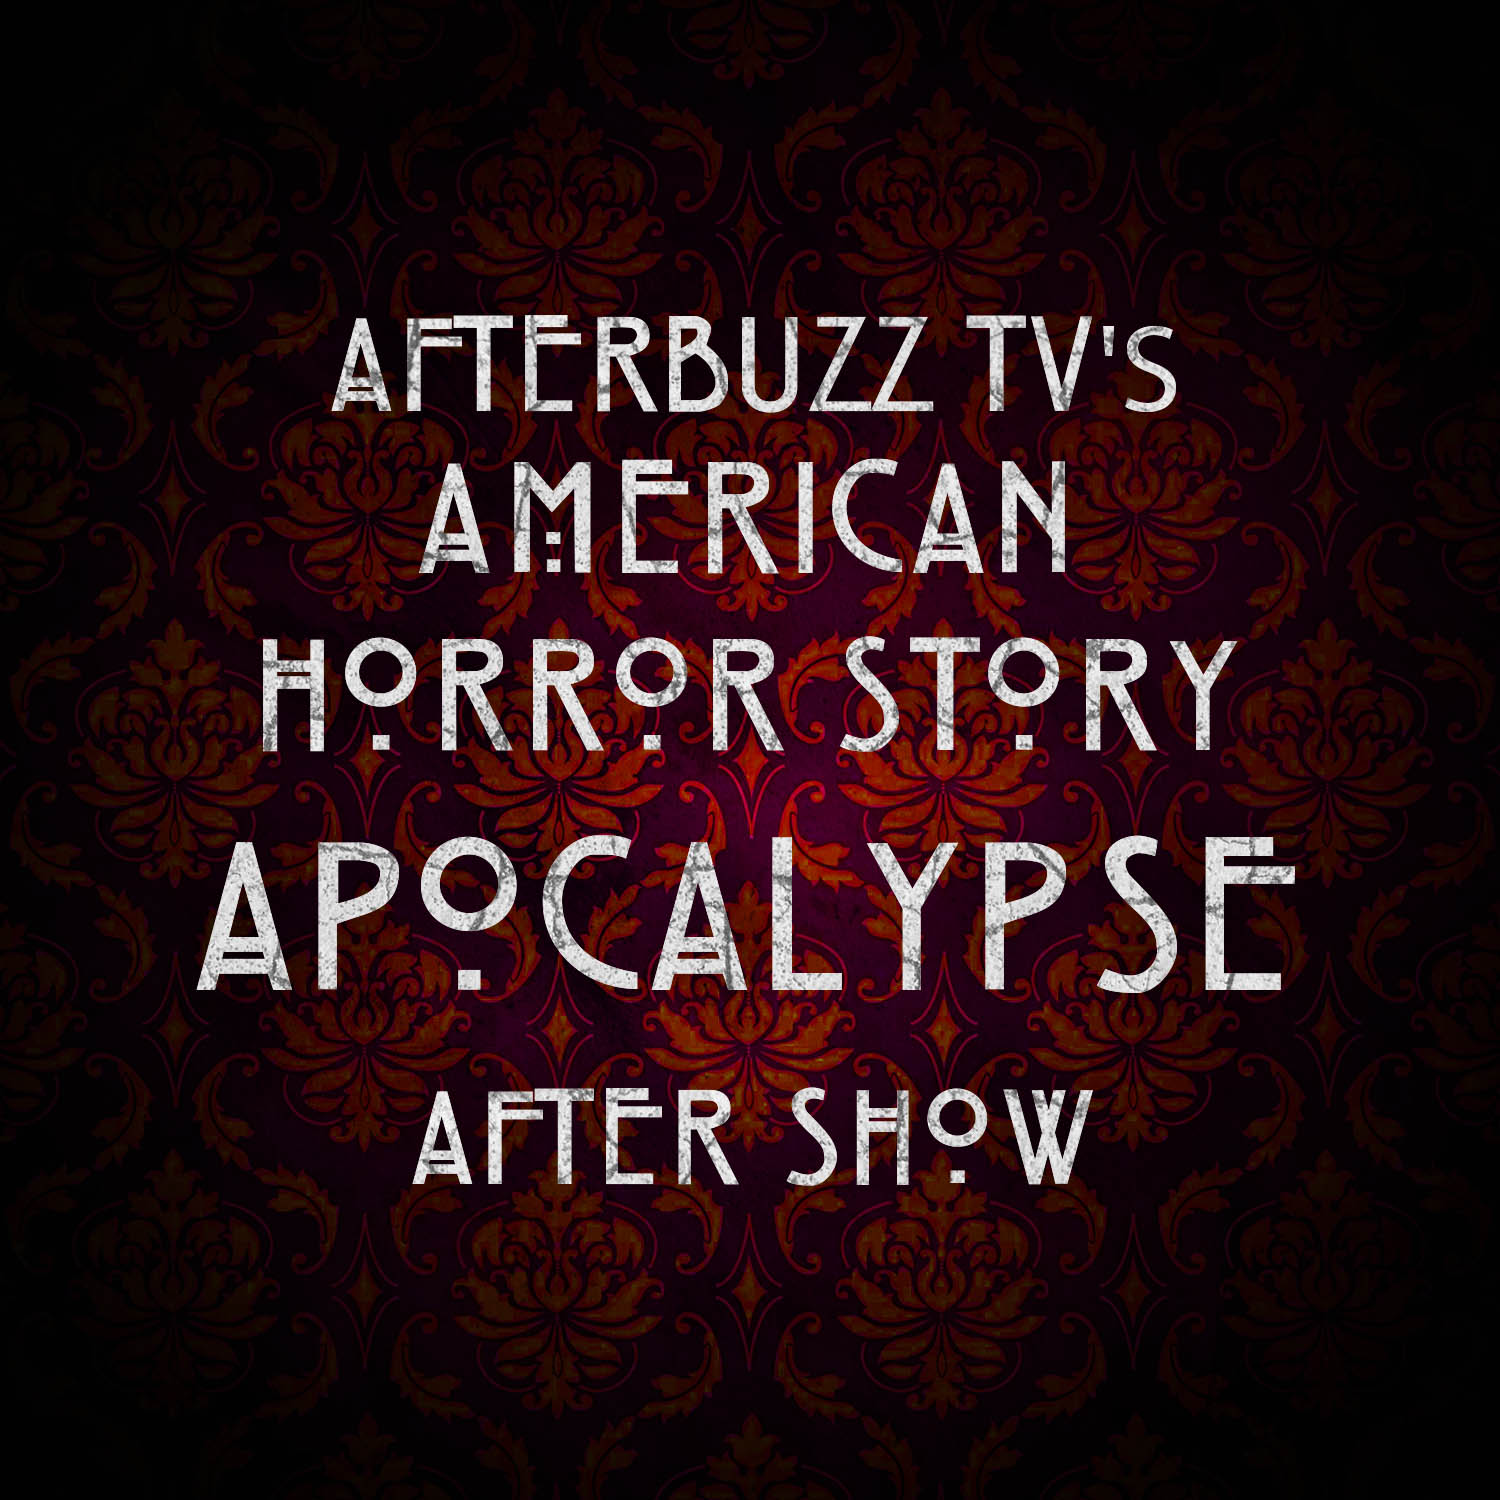 American Horror Story: Apocalypse | The Morning After E:2 | AfterBuzz TV AfterShow